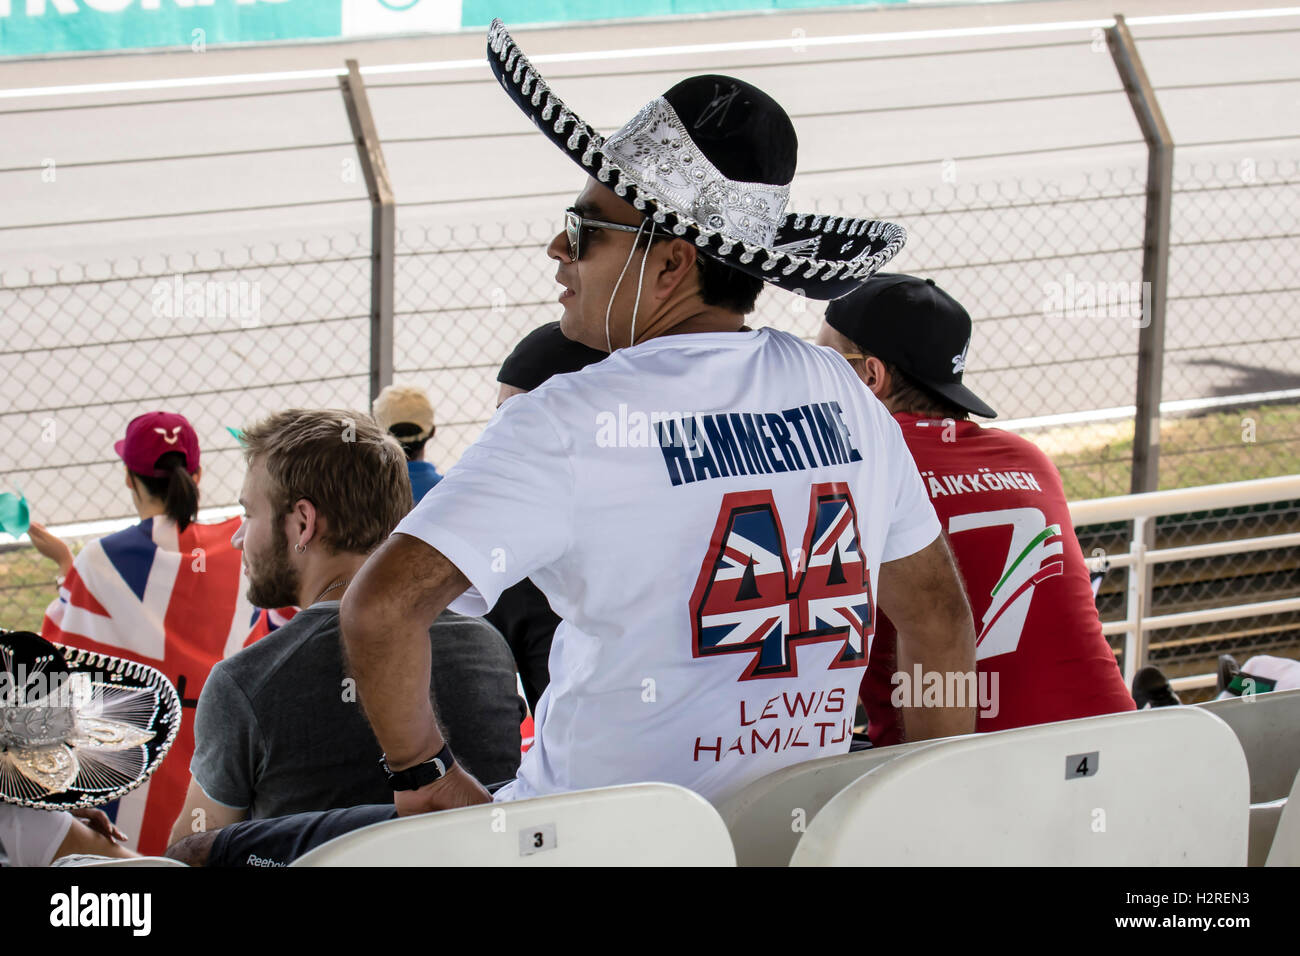 Kuala Lumpur, Malaysia. 30th Sept, 2016. F1 fans supporting their favourite F1 driver and team. Credit:  Danny Chan/Alamy Live News. Stock Photo